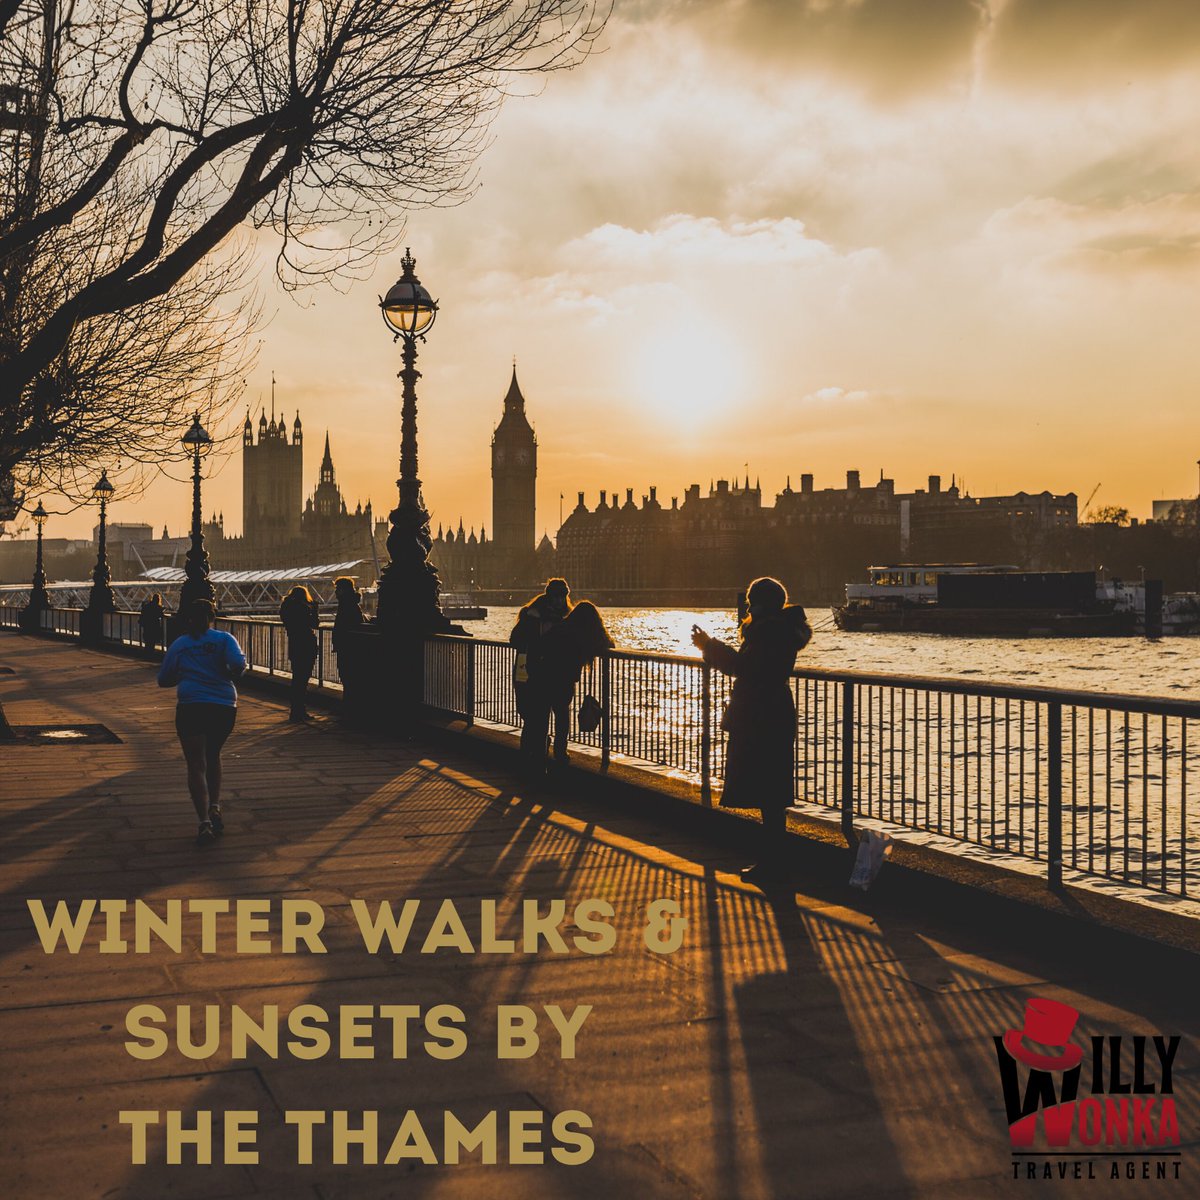 It’s time to blow away the cobwebs and get some fresh air! One of our favourite walks in #London is along the #RiverThames, where you can stop for a hot chocolate or a bite to eat and watch the world go by. The perfect way to finish off a day in London!
#travellingwithautism